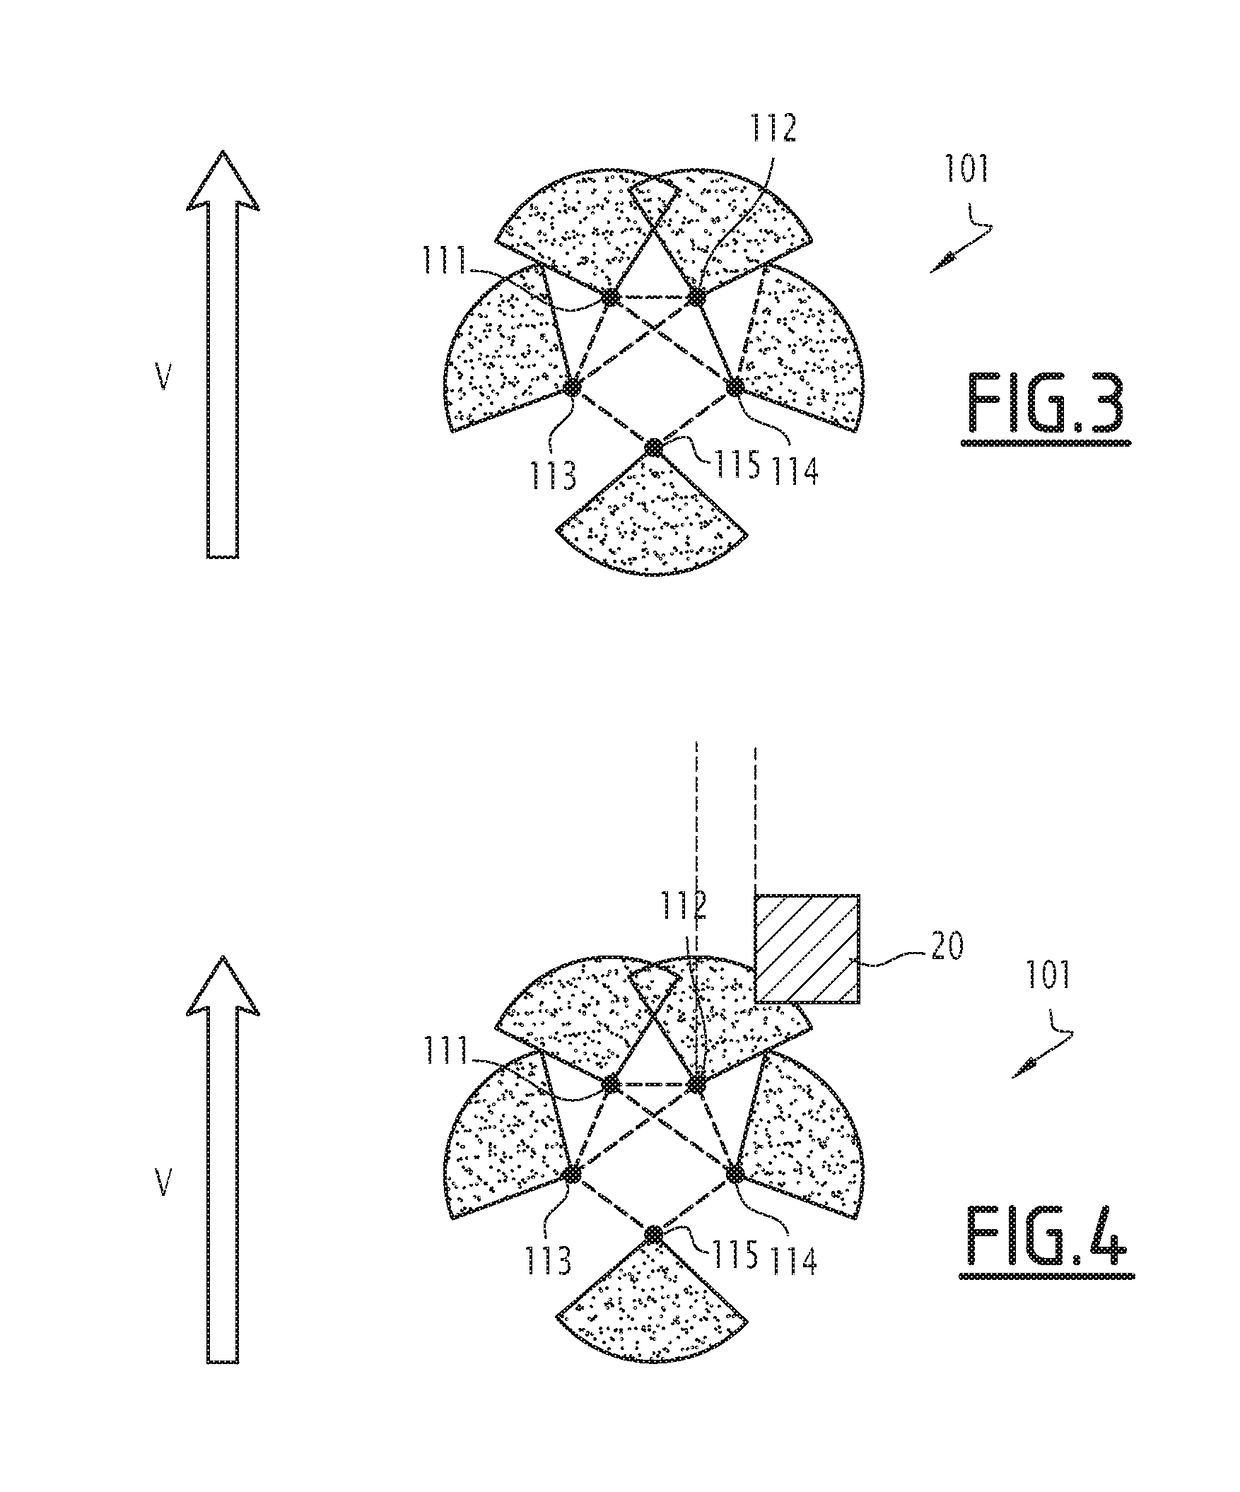 Swarm consisting of a plurality of lightweight drones